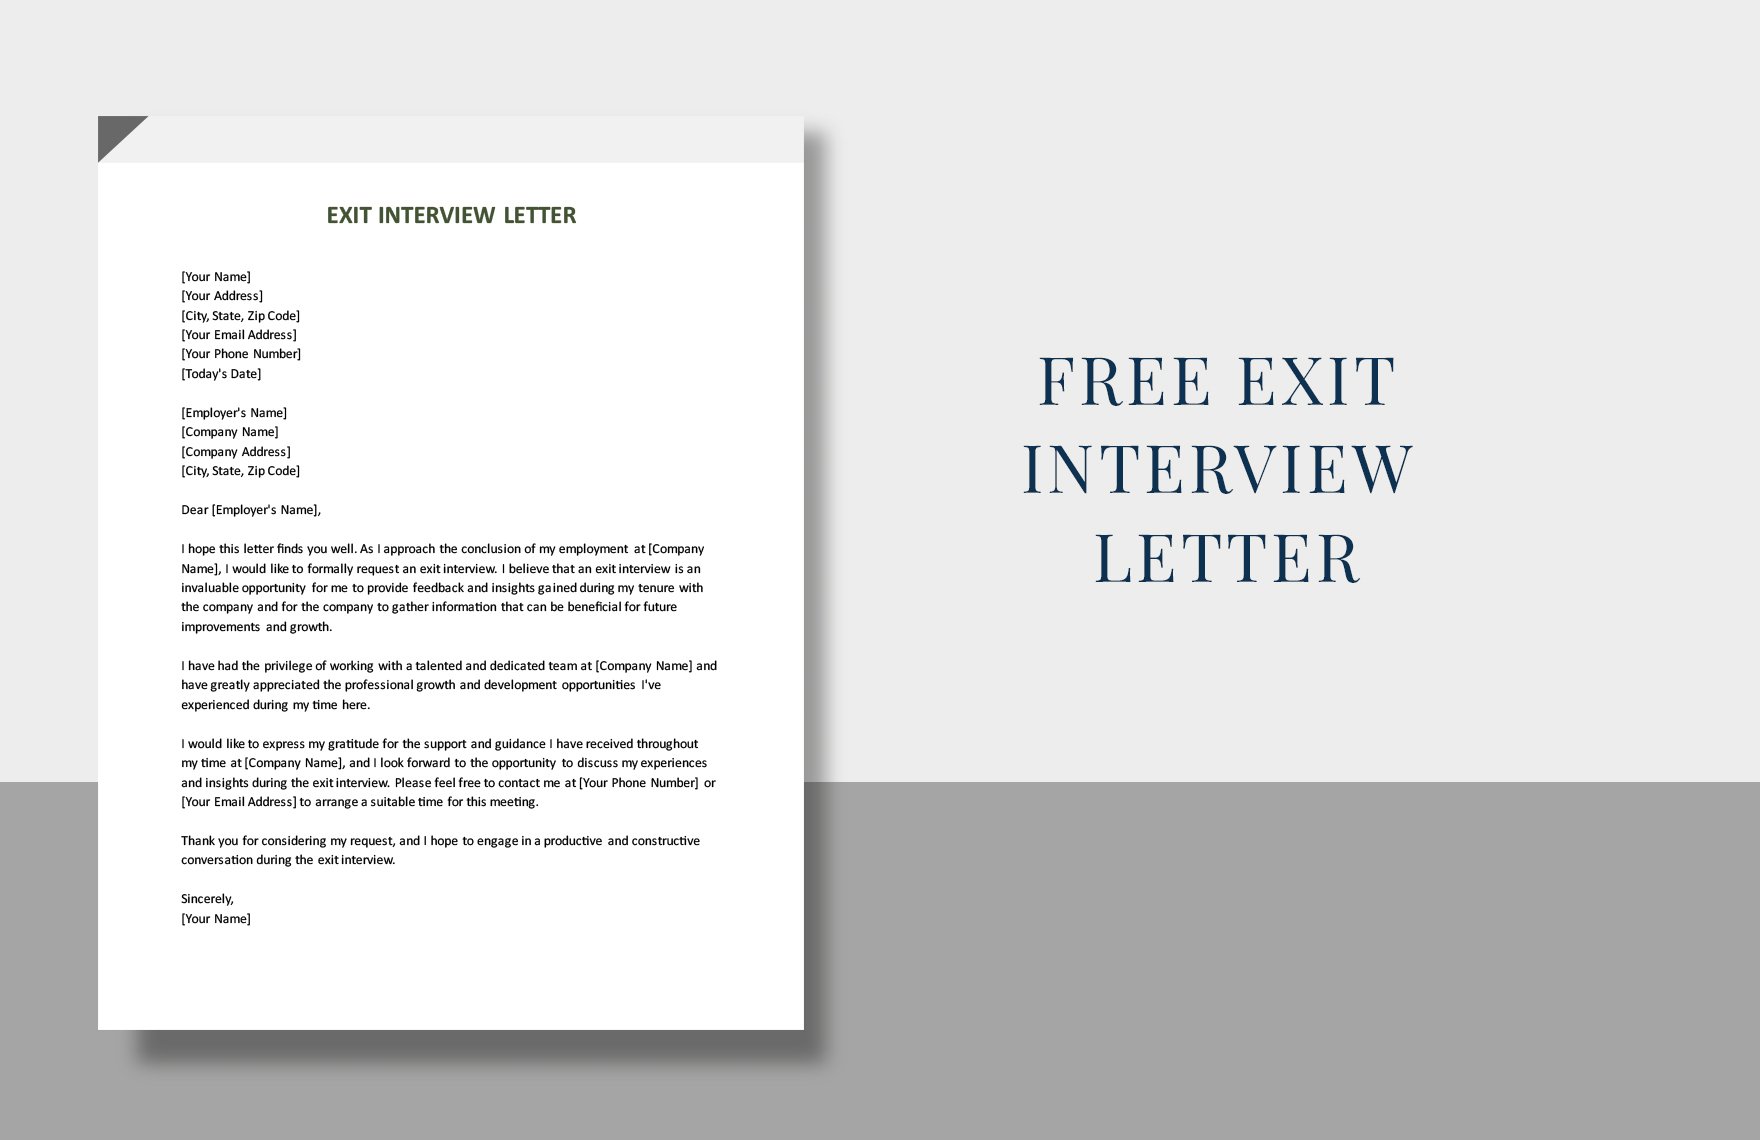 Free Exit Interview Letter